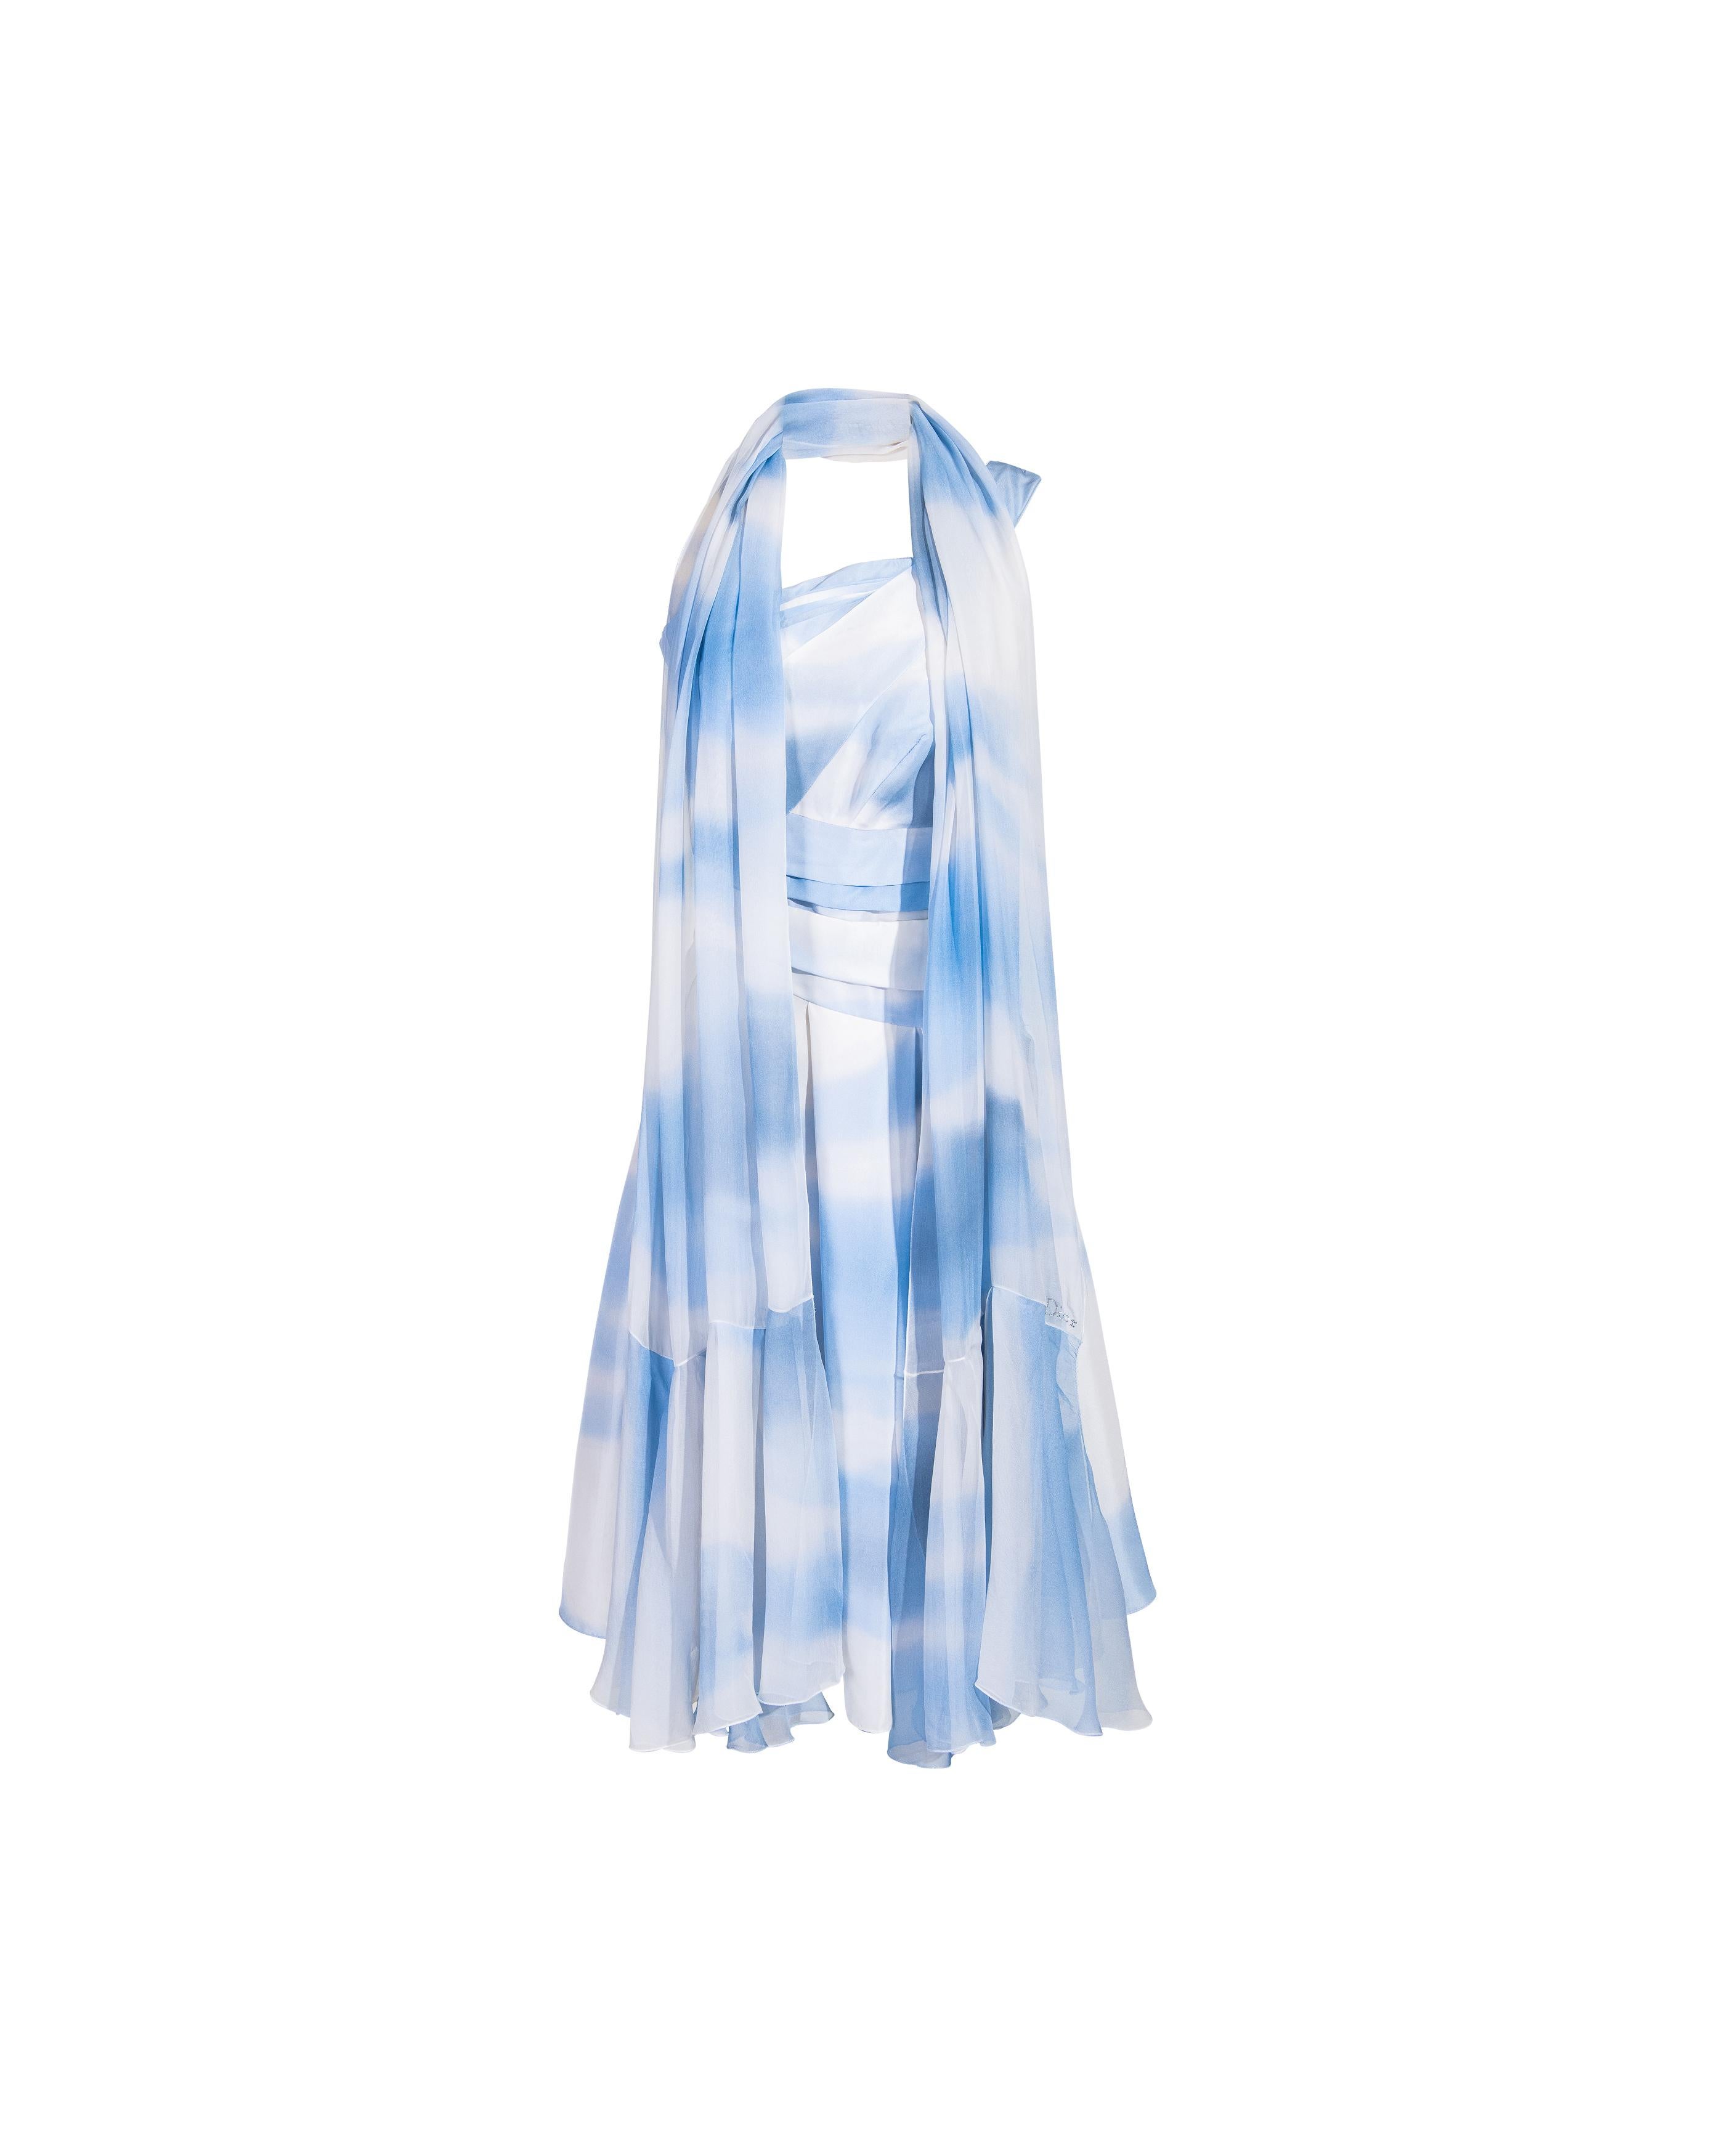 c. 2007 Christian Dior by John Galliano Boutique cloud print silk dress and matching stole. Asymmetrical one-shoulder knee-length dress with layered pleated waist and bust, with matching blue and white sky print stole featuring rhinestone 'Dior'